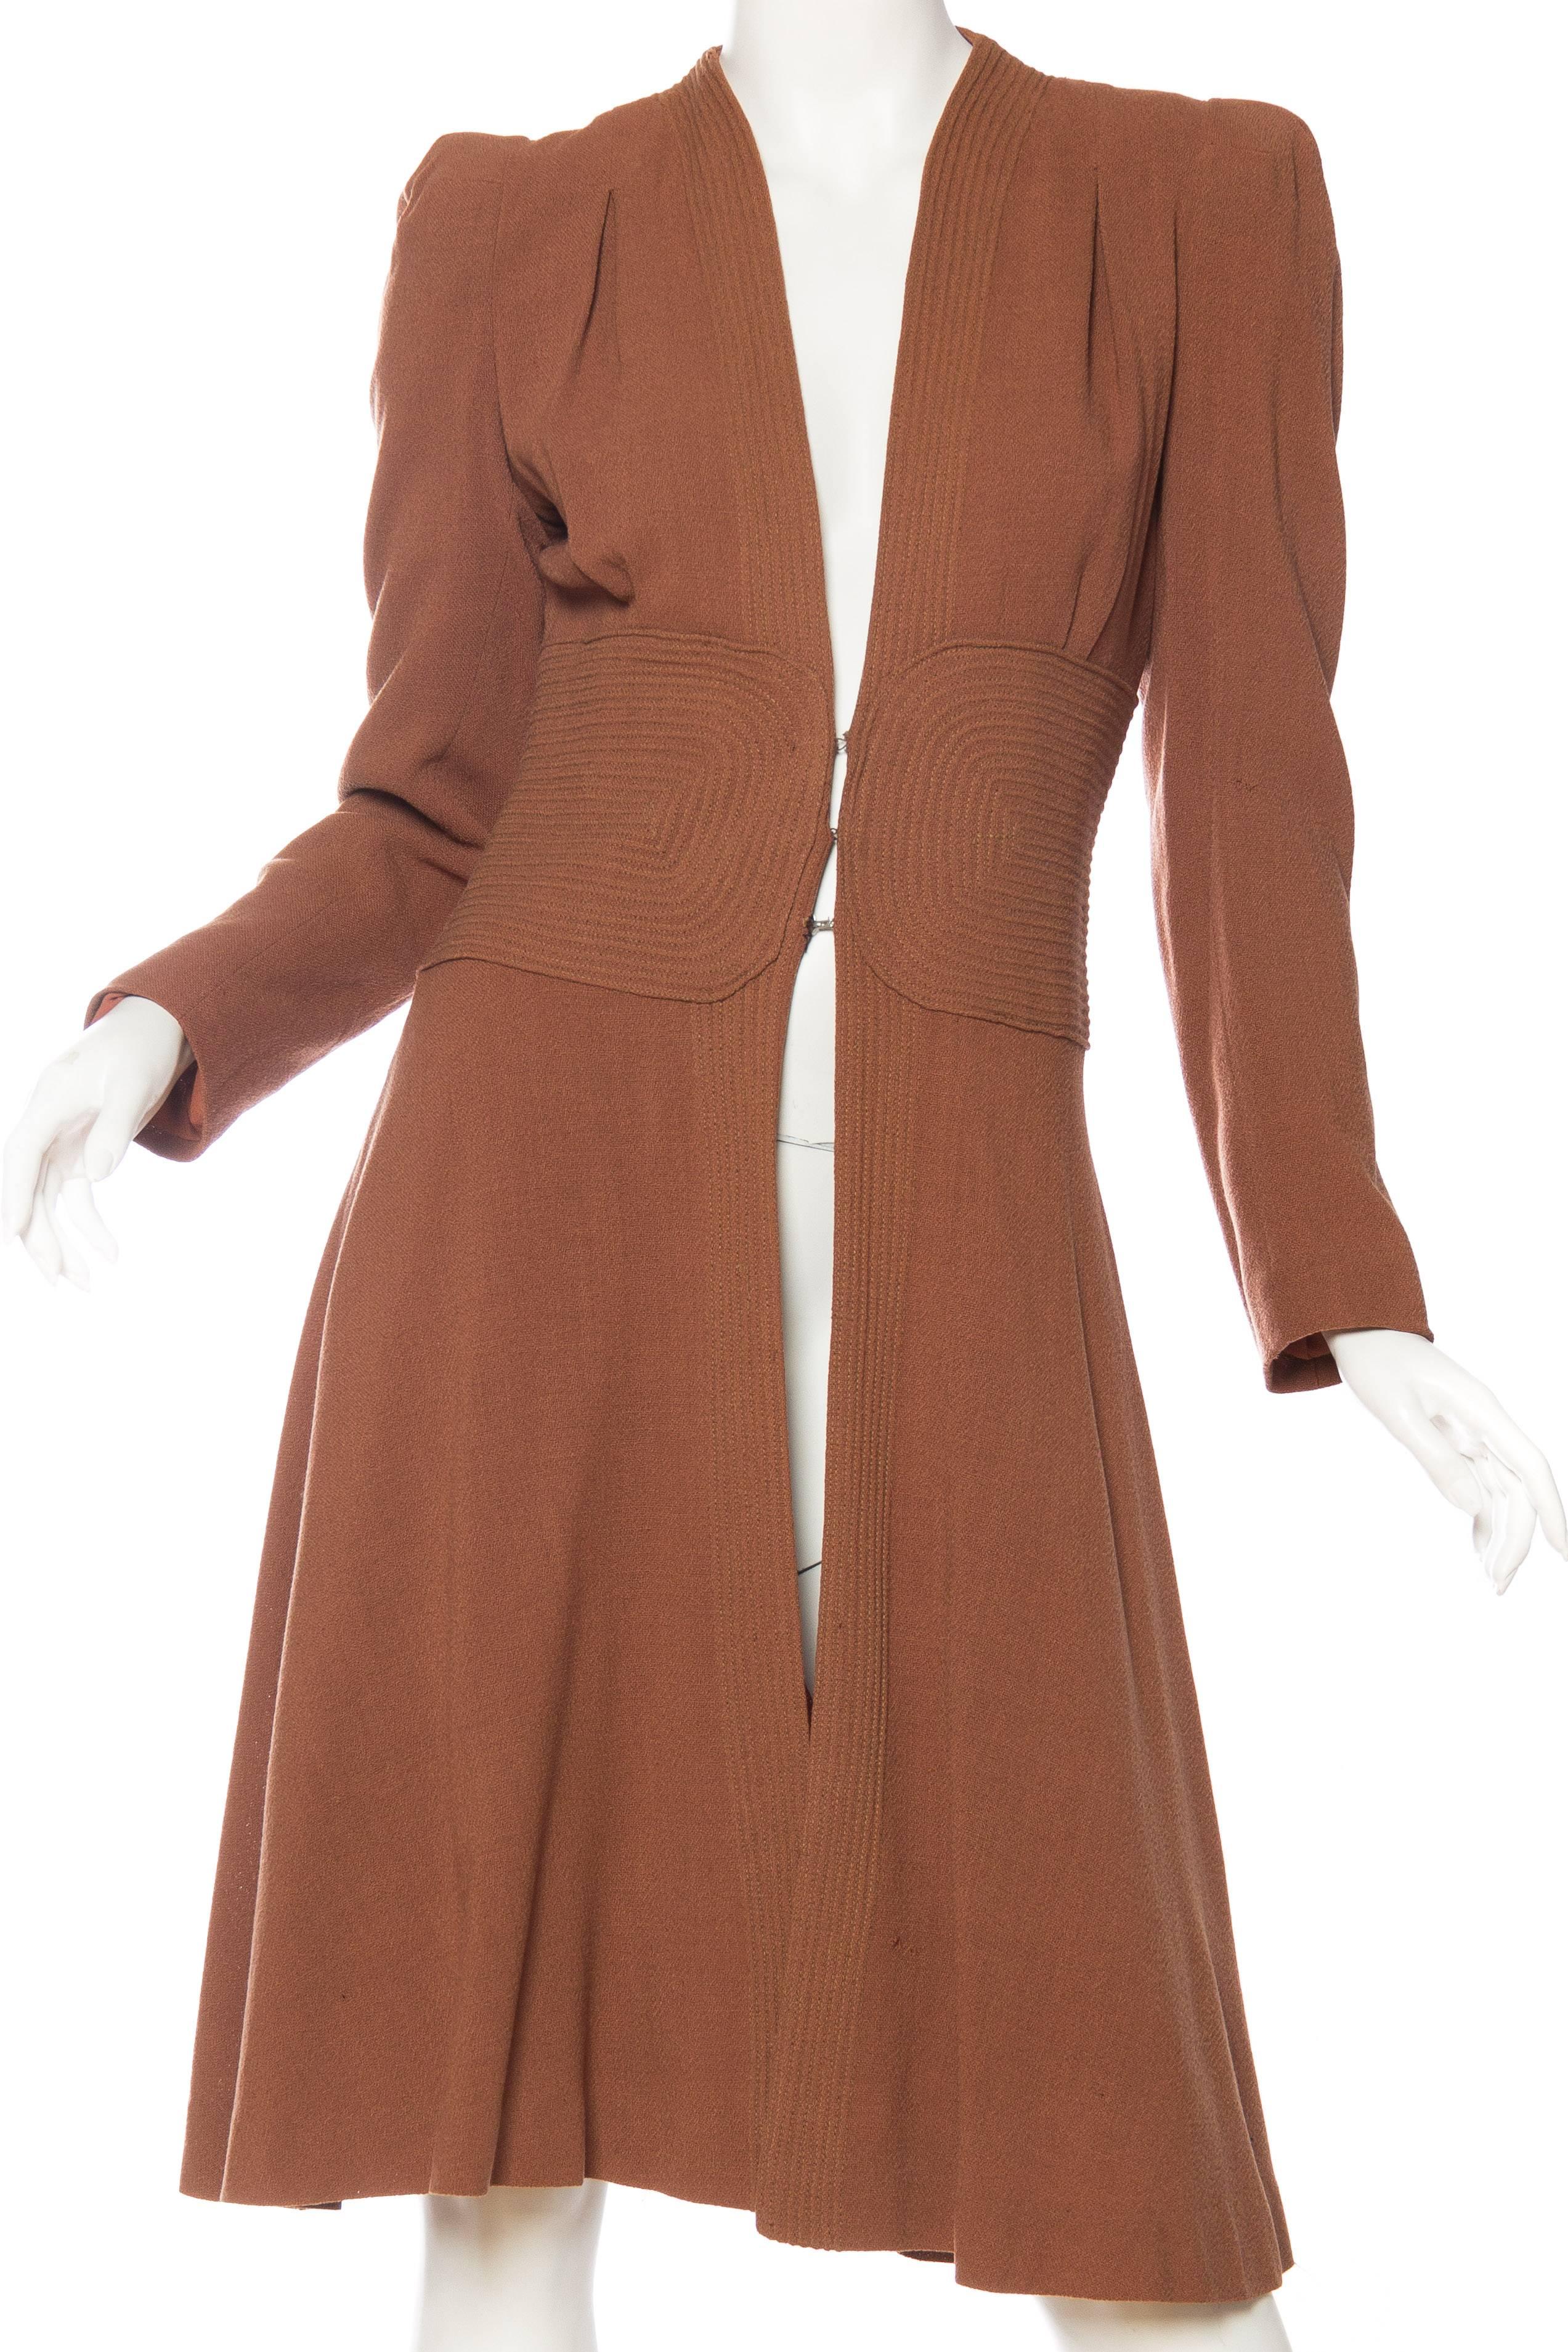 This coat dates from the late 1930s or the early 1940s. This is very much the style of piece which inspired the 1970s designers Biba and Ossie Clark. 